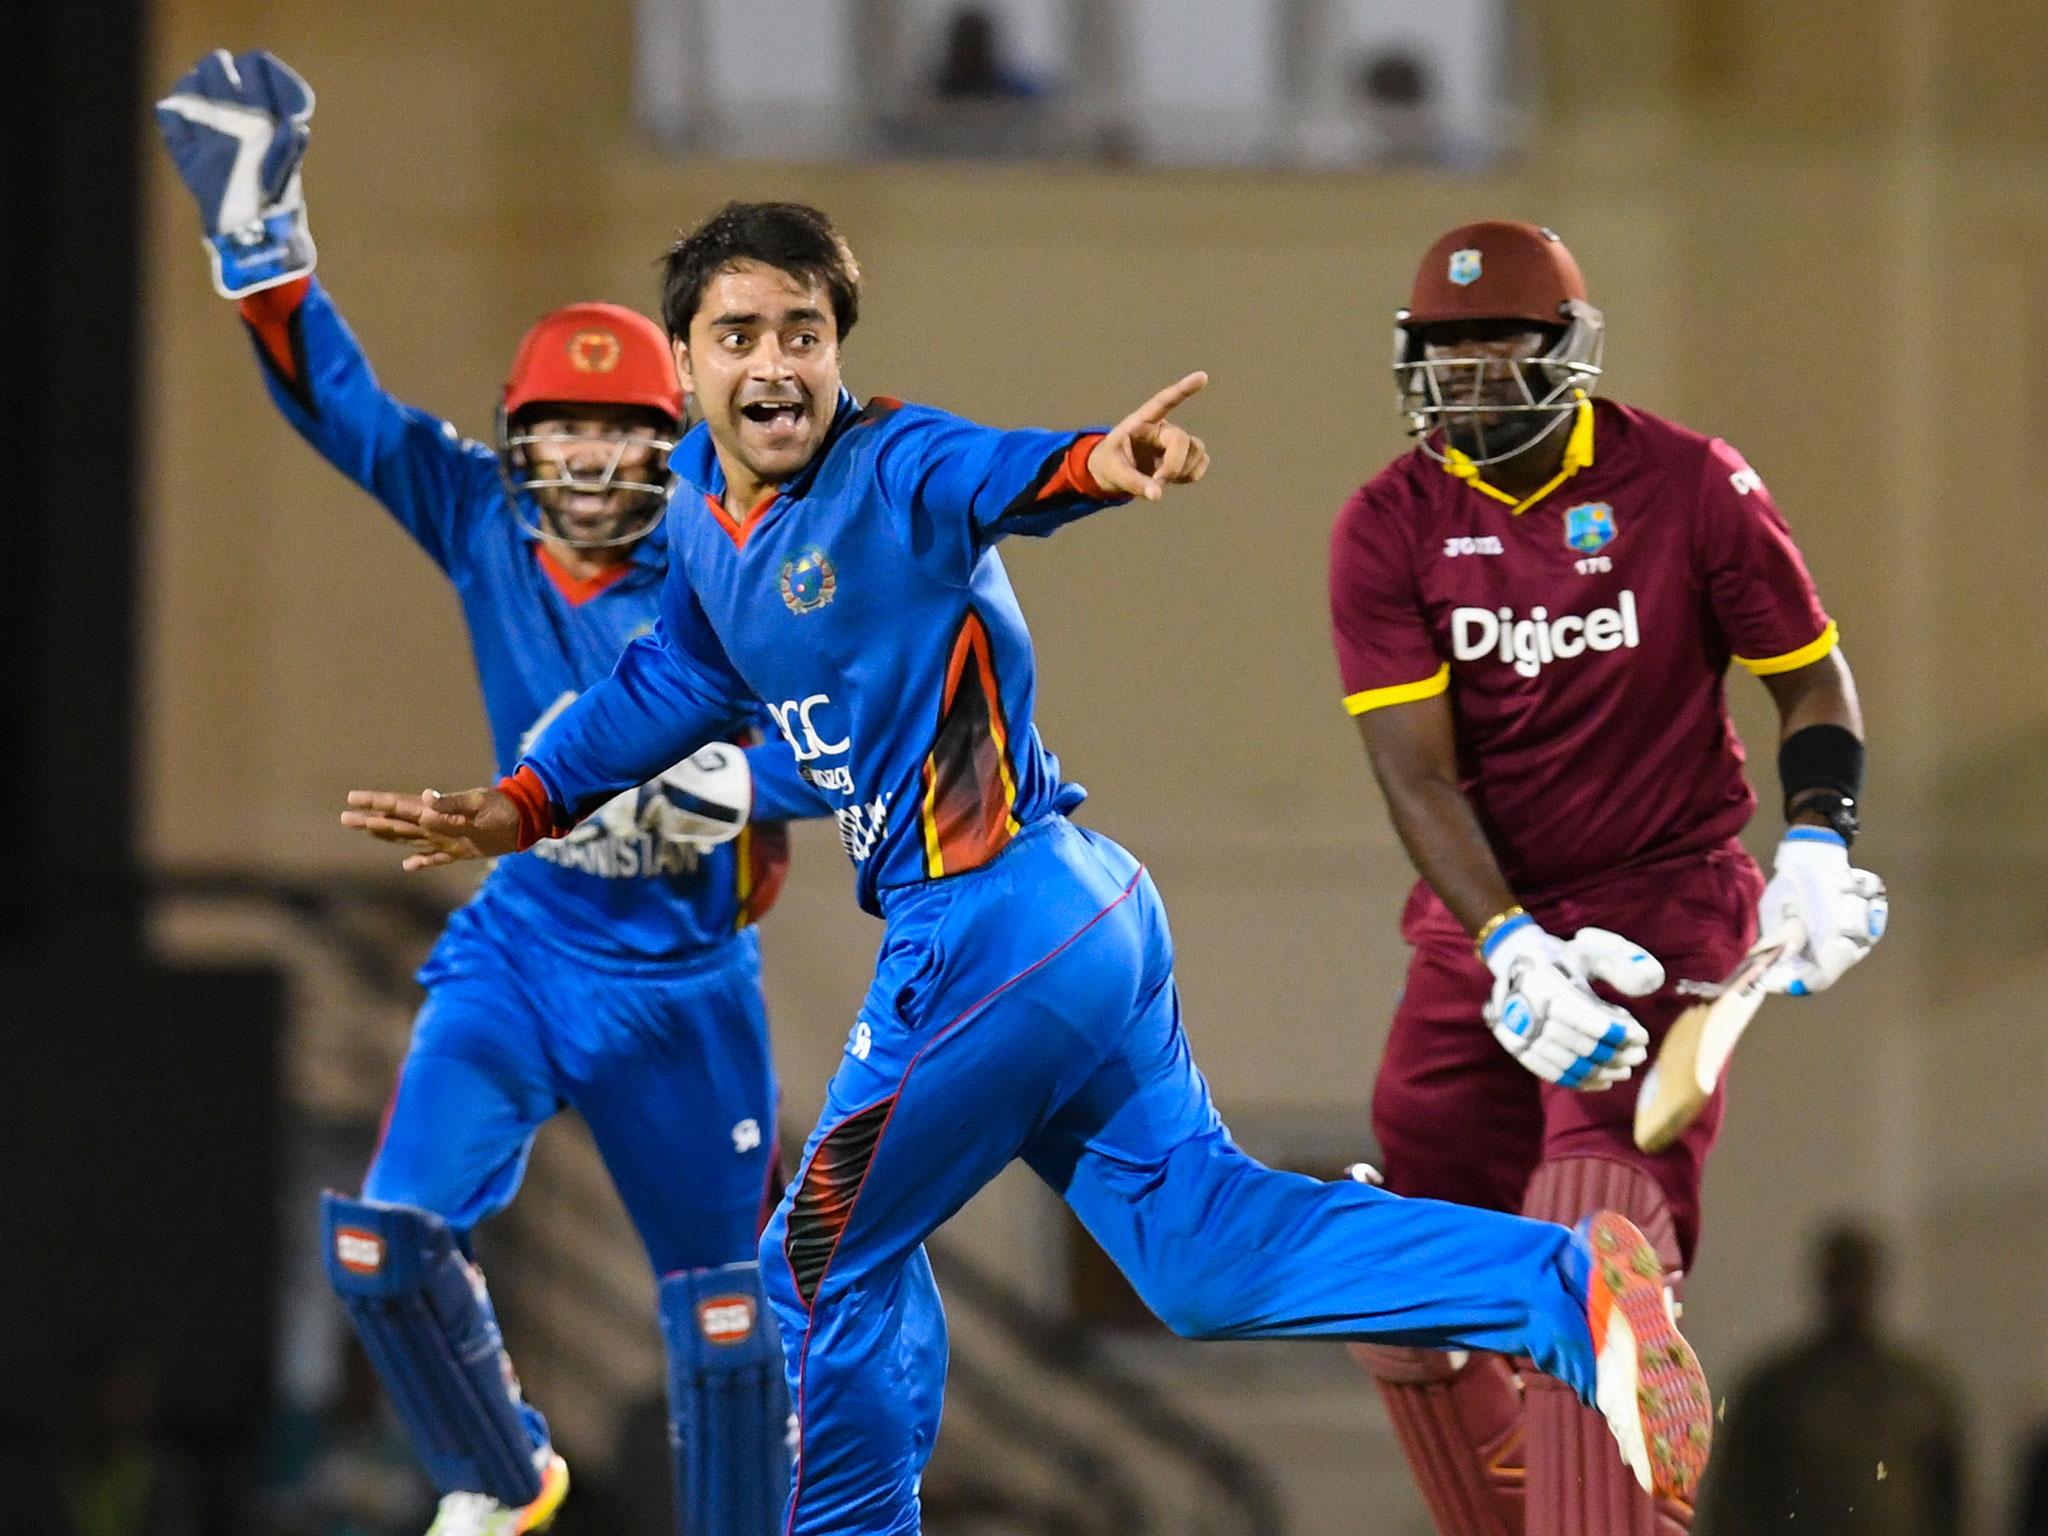 &#13;
Rashid Khan humbled West Indies with a stunning display of spin bowling &#13;